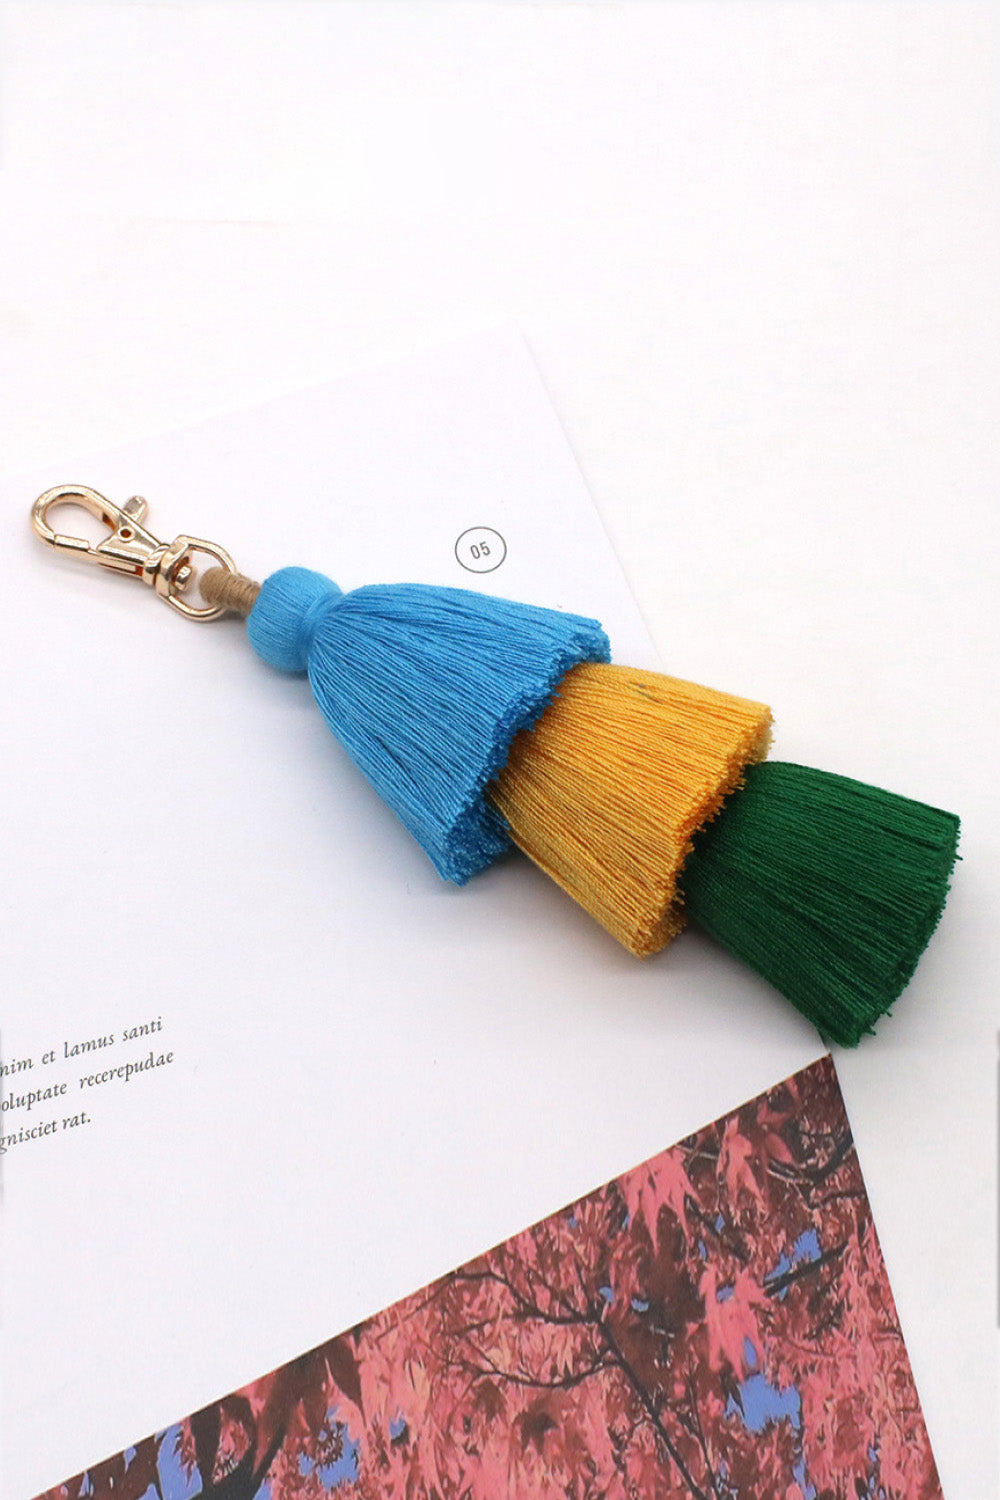 Trendsi Cupid Beauty Supplies Blue/Mustard/Green / One Size Keychains 4-Pack Multicolored Fringe Keychain, Color Varies